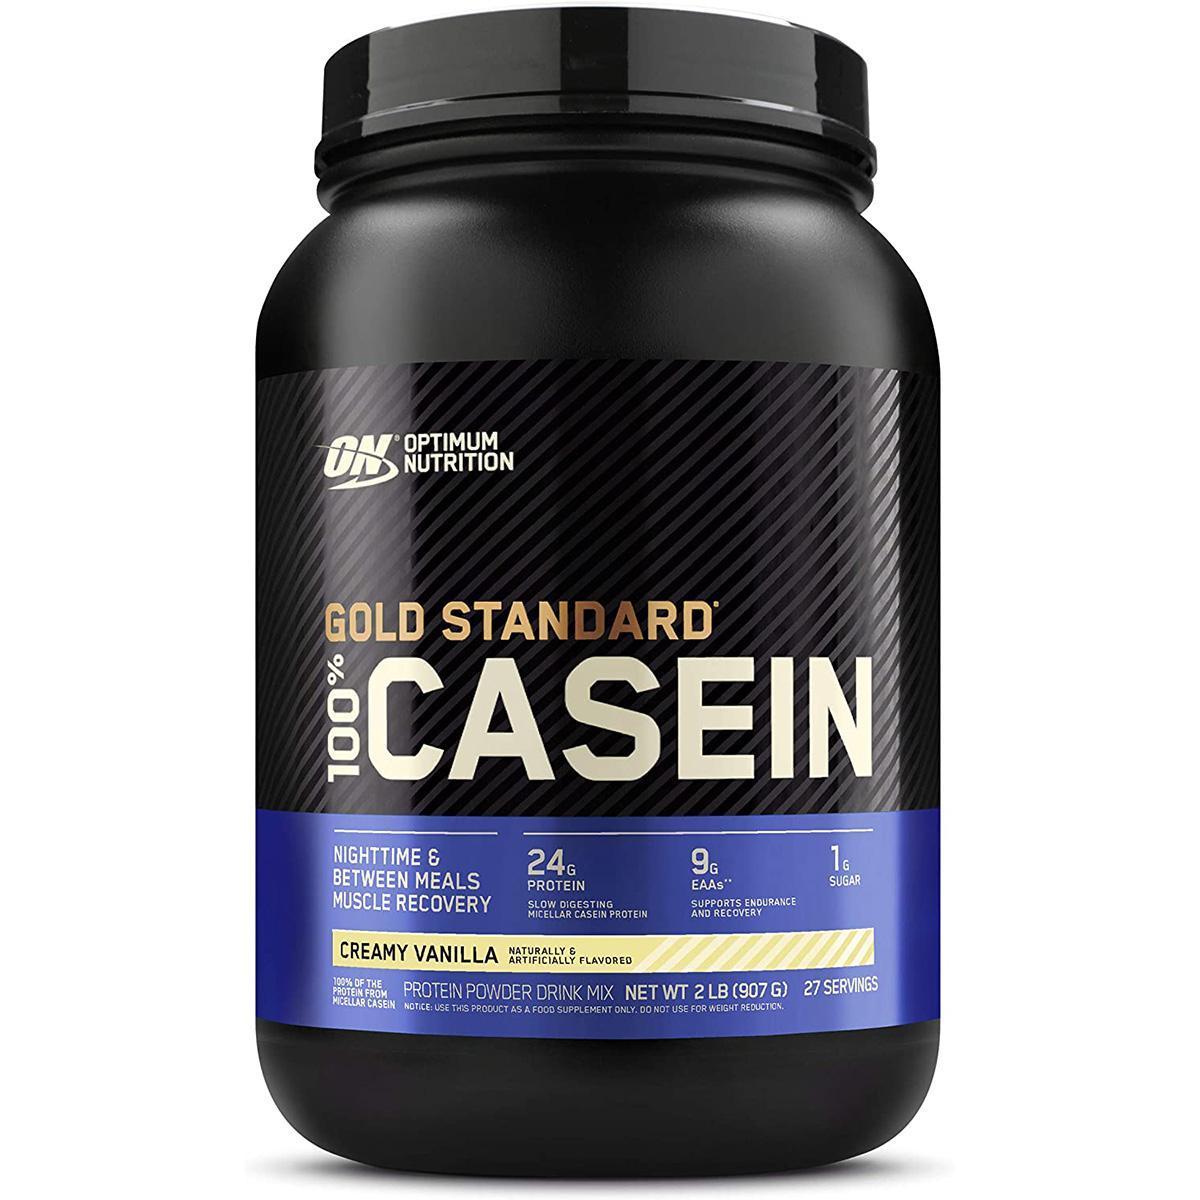 4Lbs Optimum Nutrition Gold Standard Micella Casein Protein Powder for $34.28 Shipped